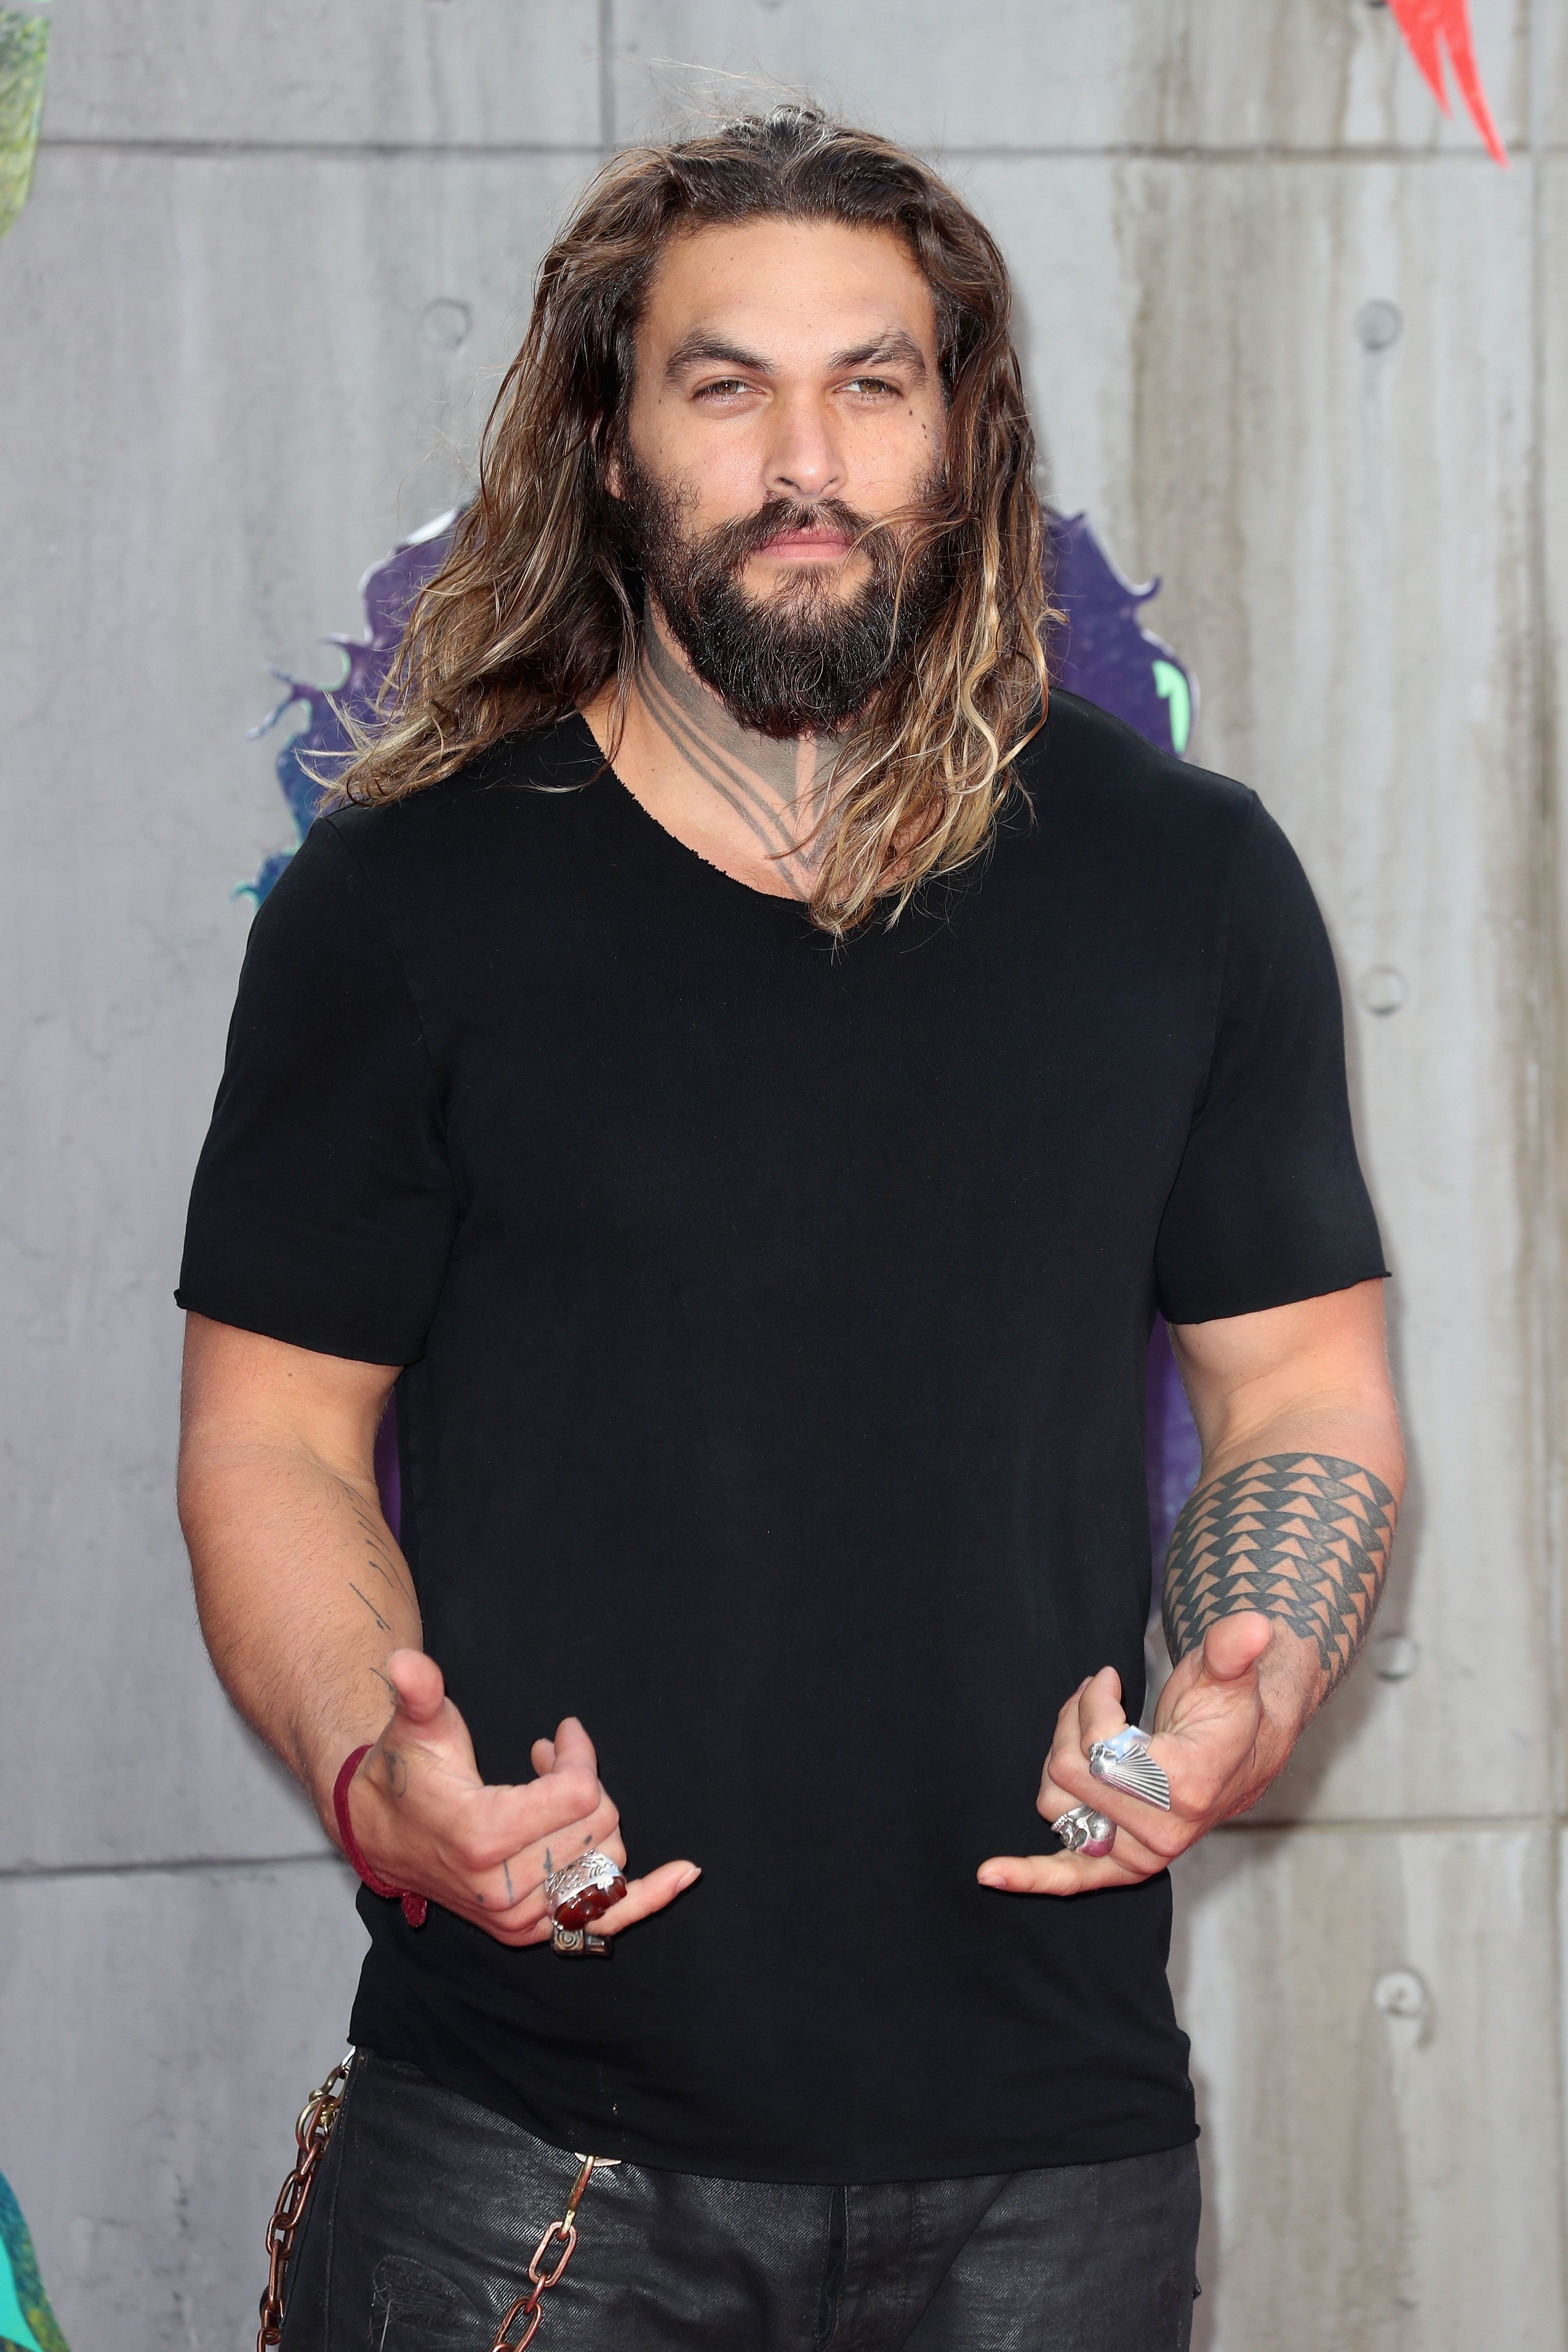 20 Best Jason Momoa Hair and Beard Style with Images - AtoZ Hairstyles